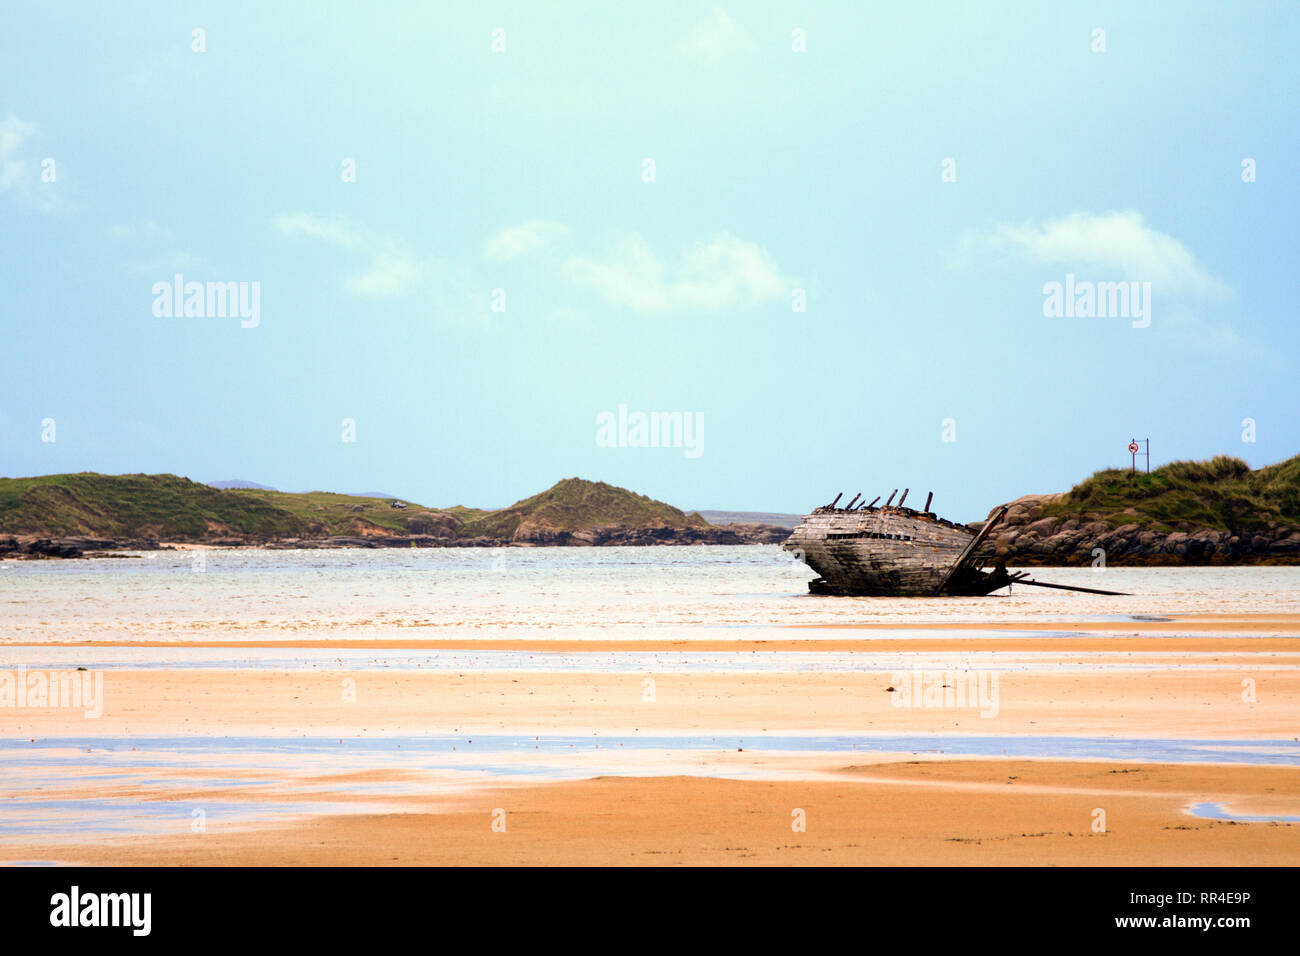 Bád Eddie, Eddie's Boat, Magheraclogher Beach, Gweedore, Co. Donegal, irland Stockfoto